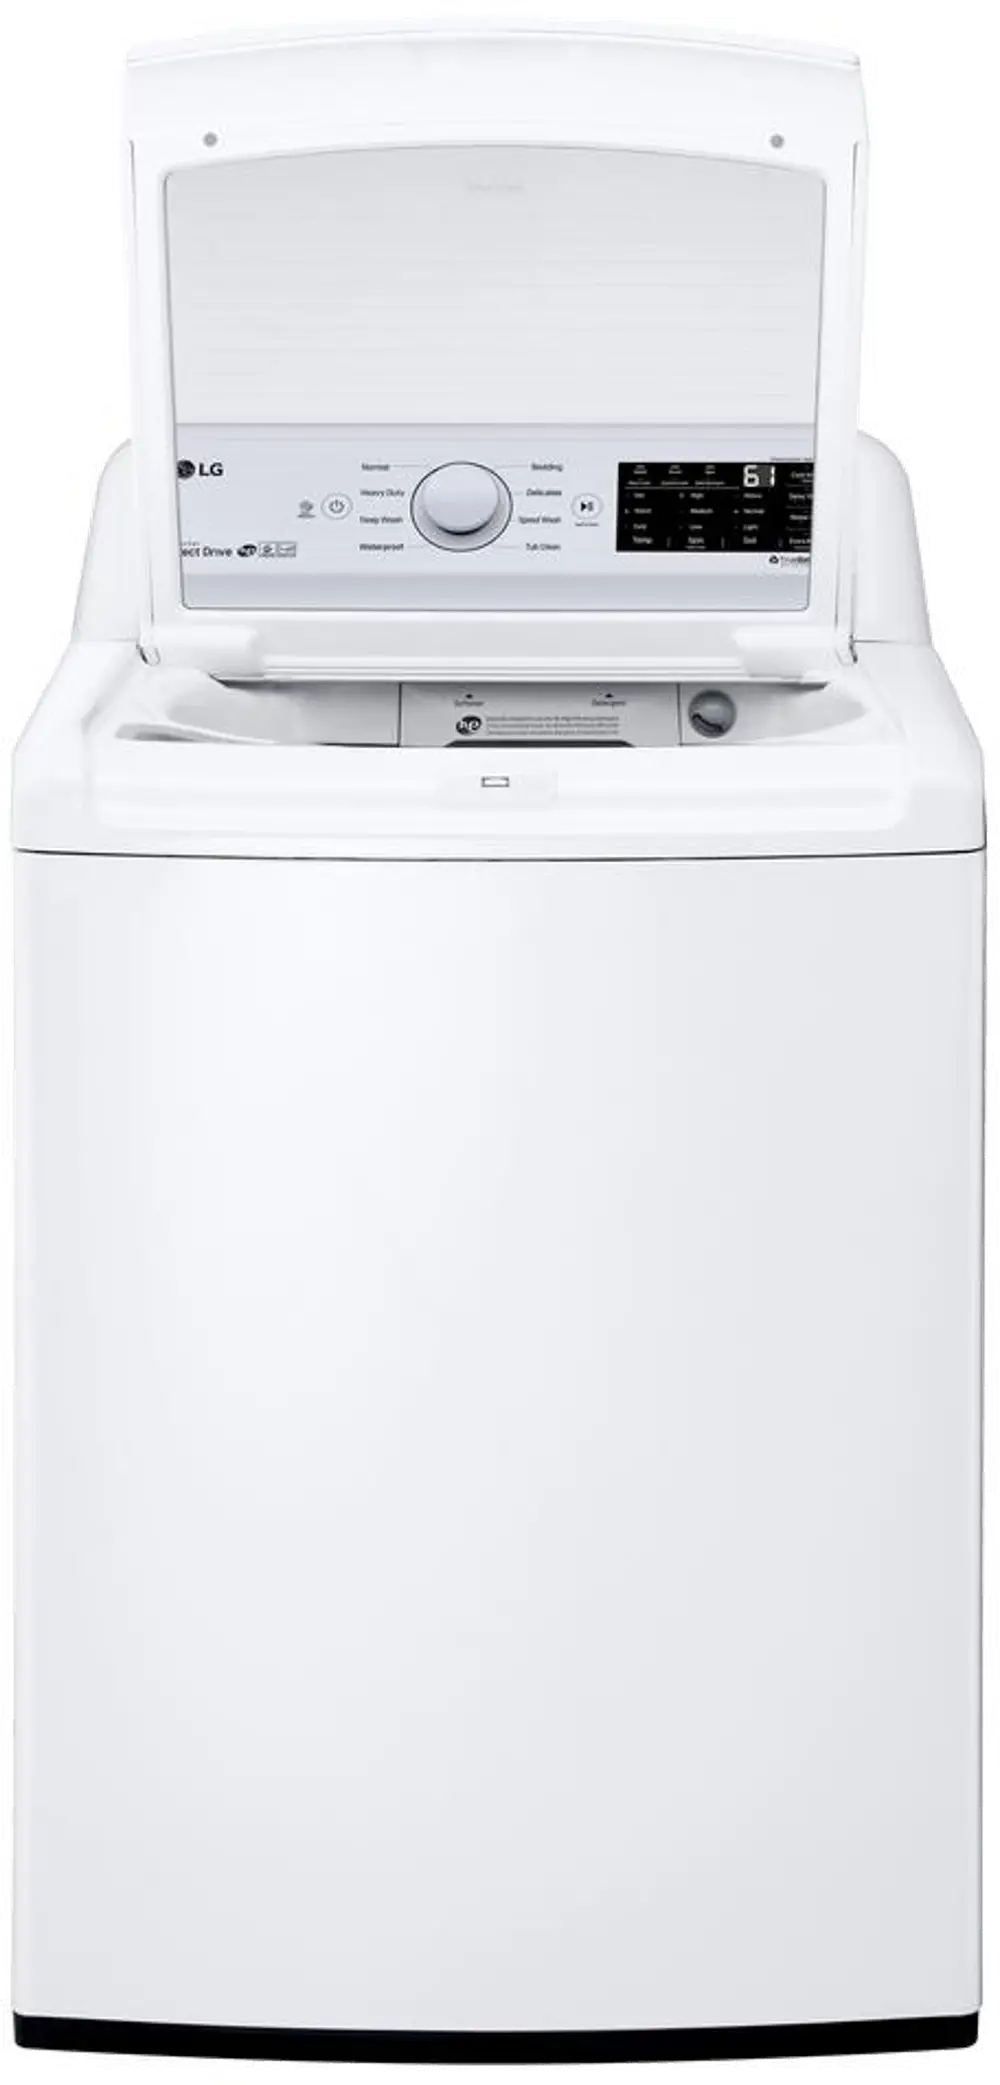 WT7100CW LG Clear Top Top Load Washer - 4.5 cu. ft. White-1